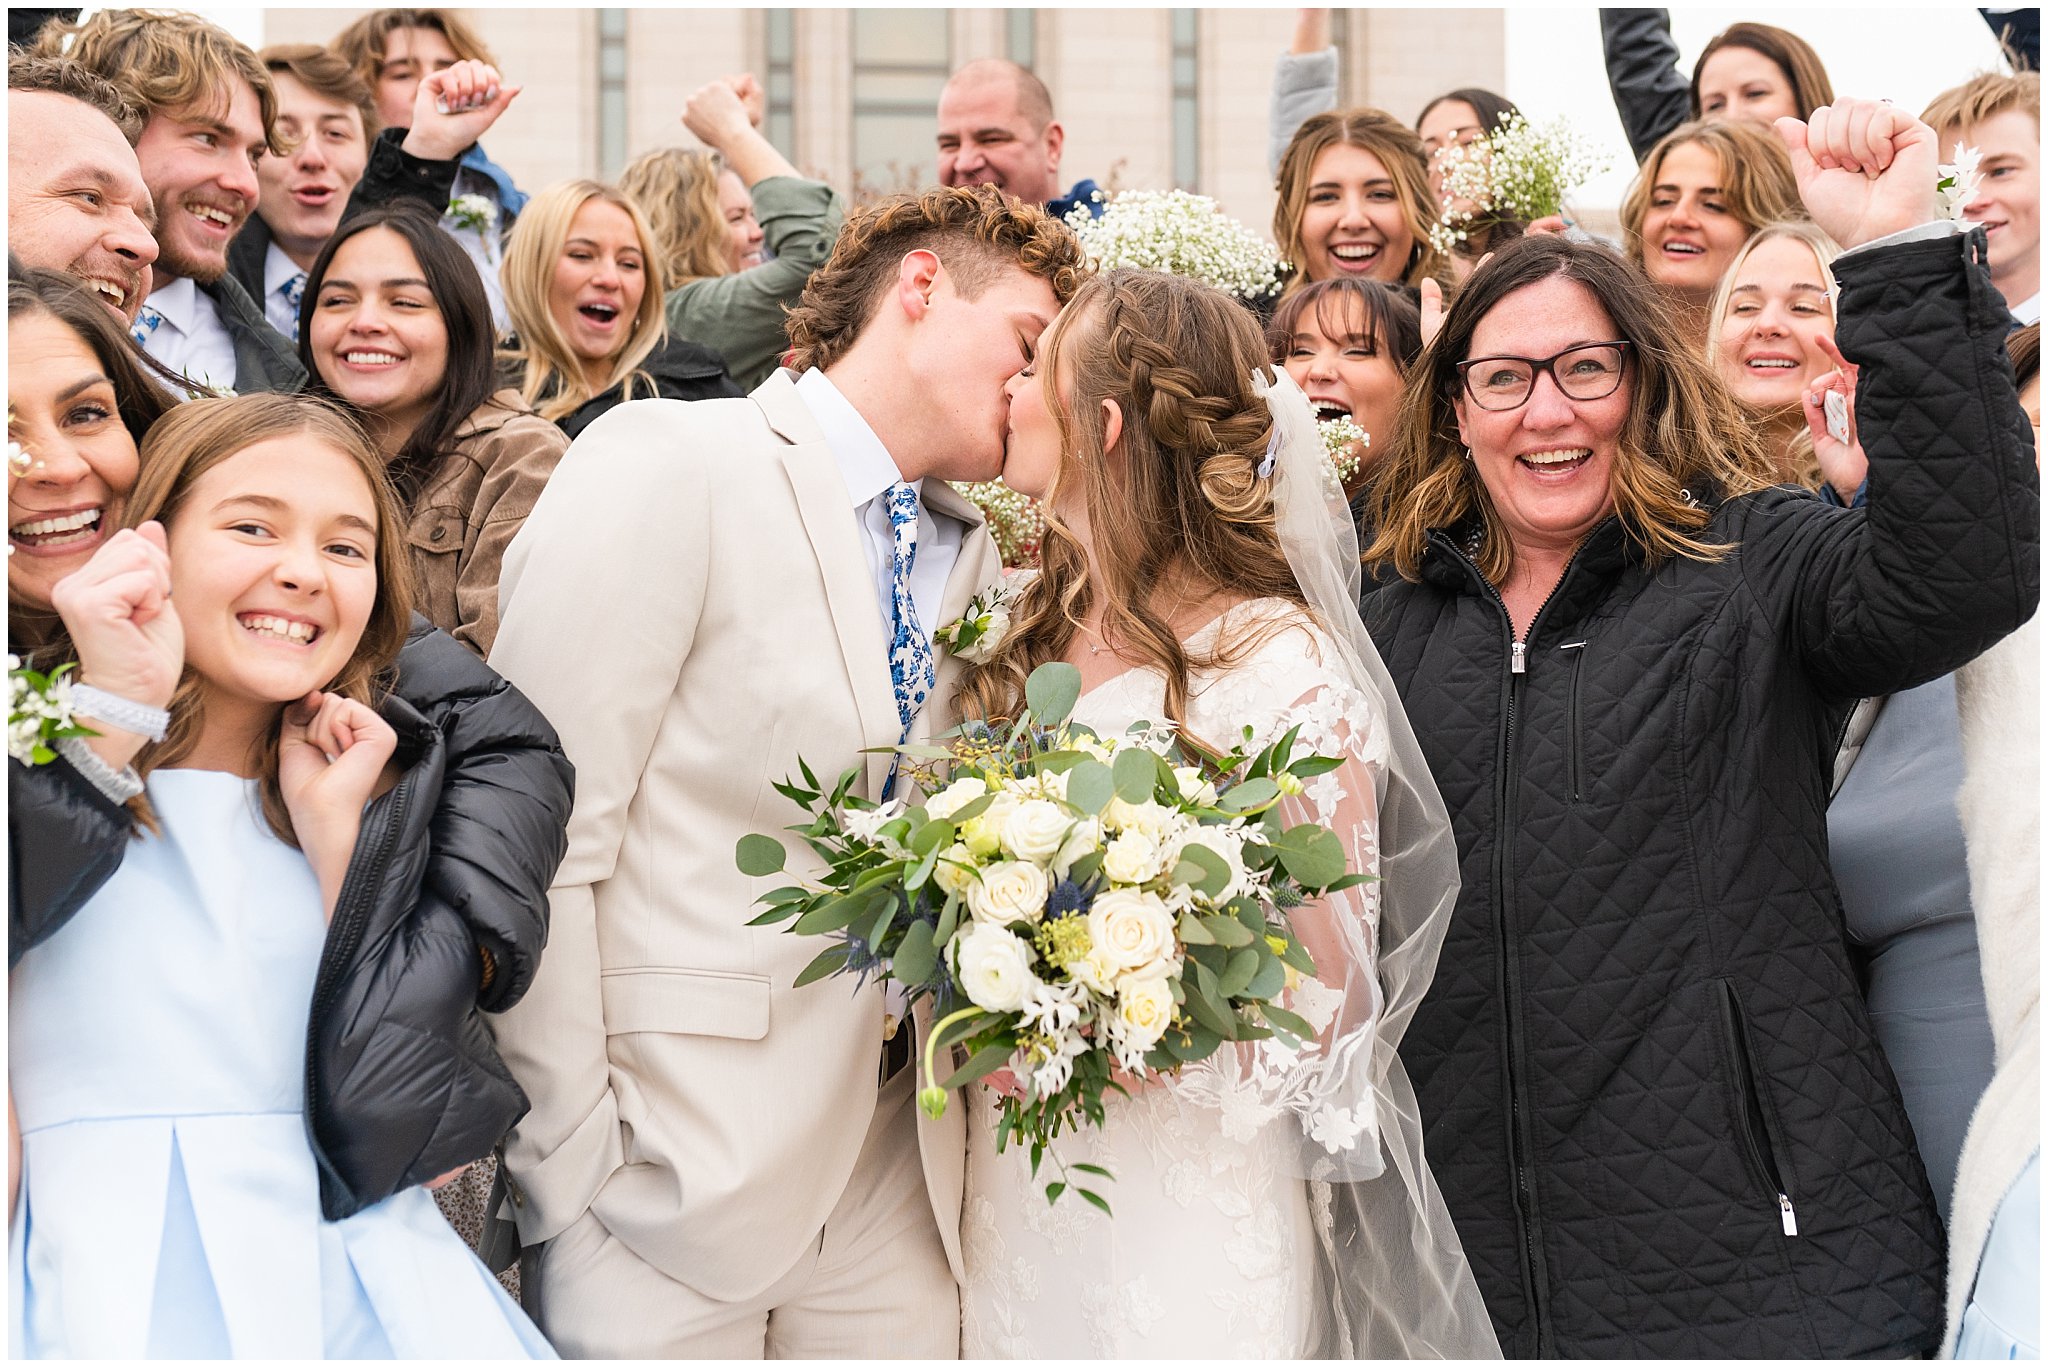 Bride and groom kiss surrounded by family and friends | Oquirrh Mountain Temple and Draper Day Barn Winter Wedding | Jessie and Dallin Photography